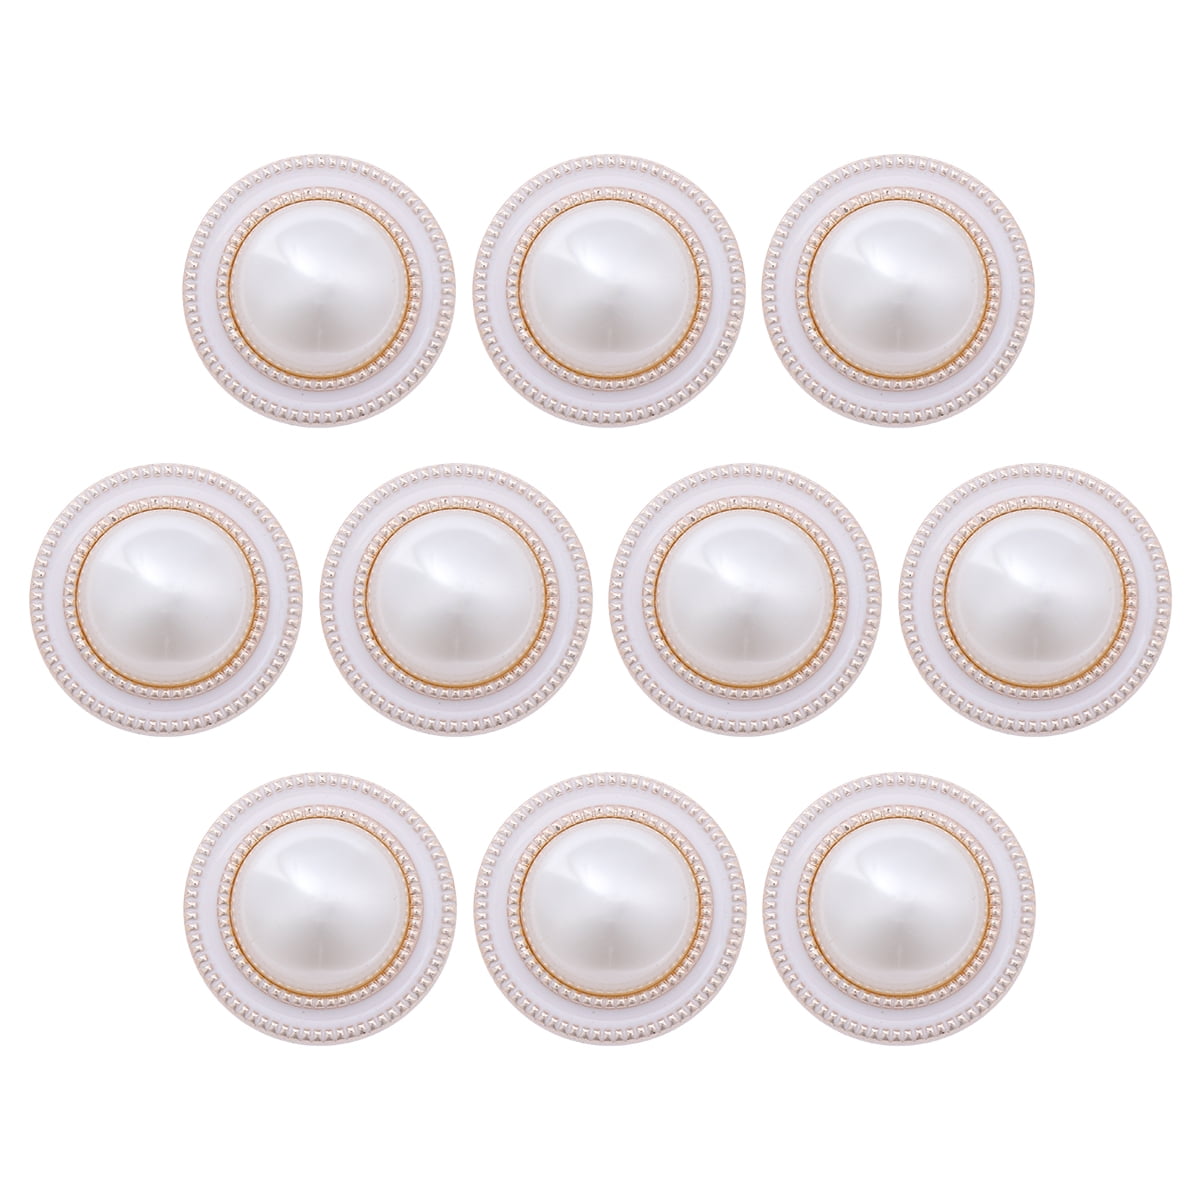 10pcs Round Shaped Button Pearl Handcraft Tools Coat Clothes Button DIY Sewing Buttons for Decor Use (9#Pattern, 34l=21., Size: 2.1